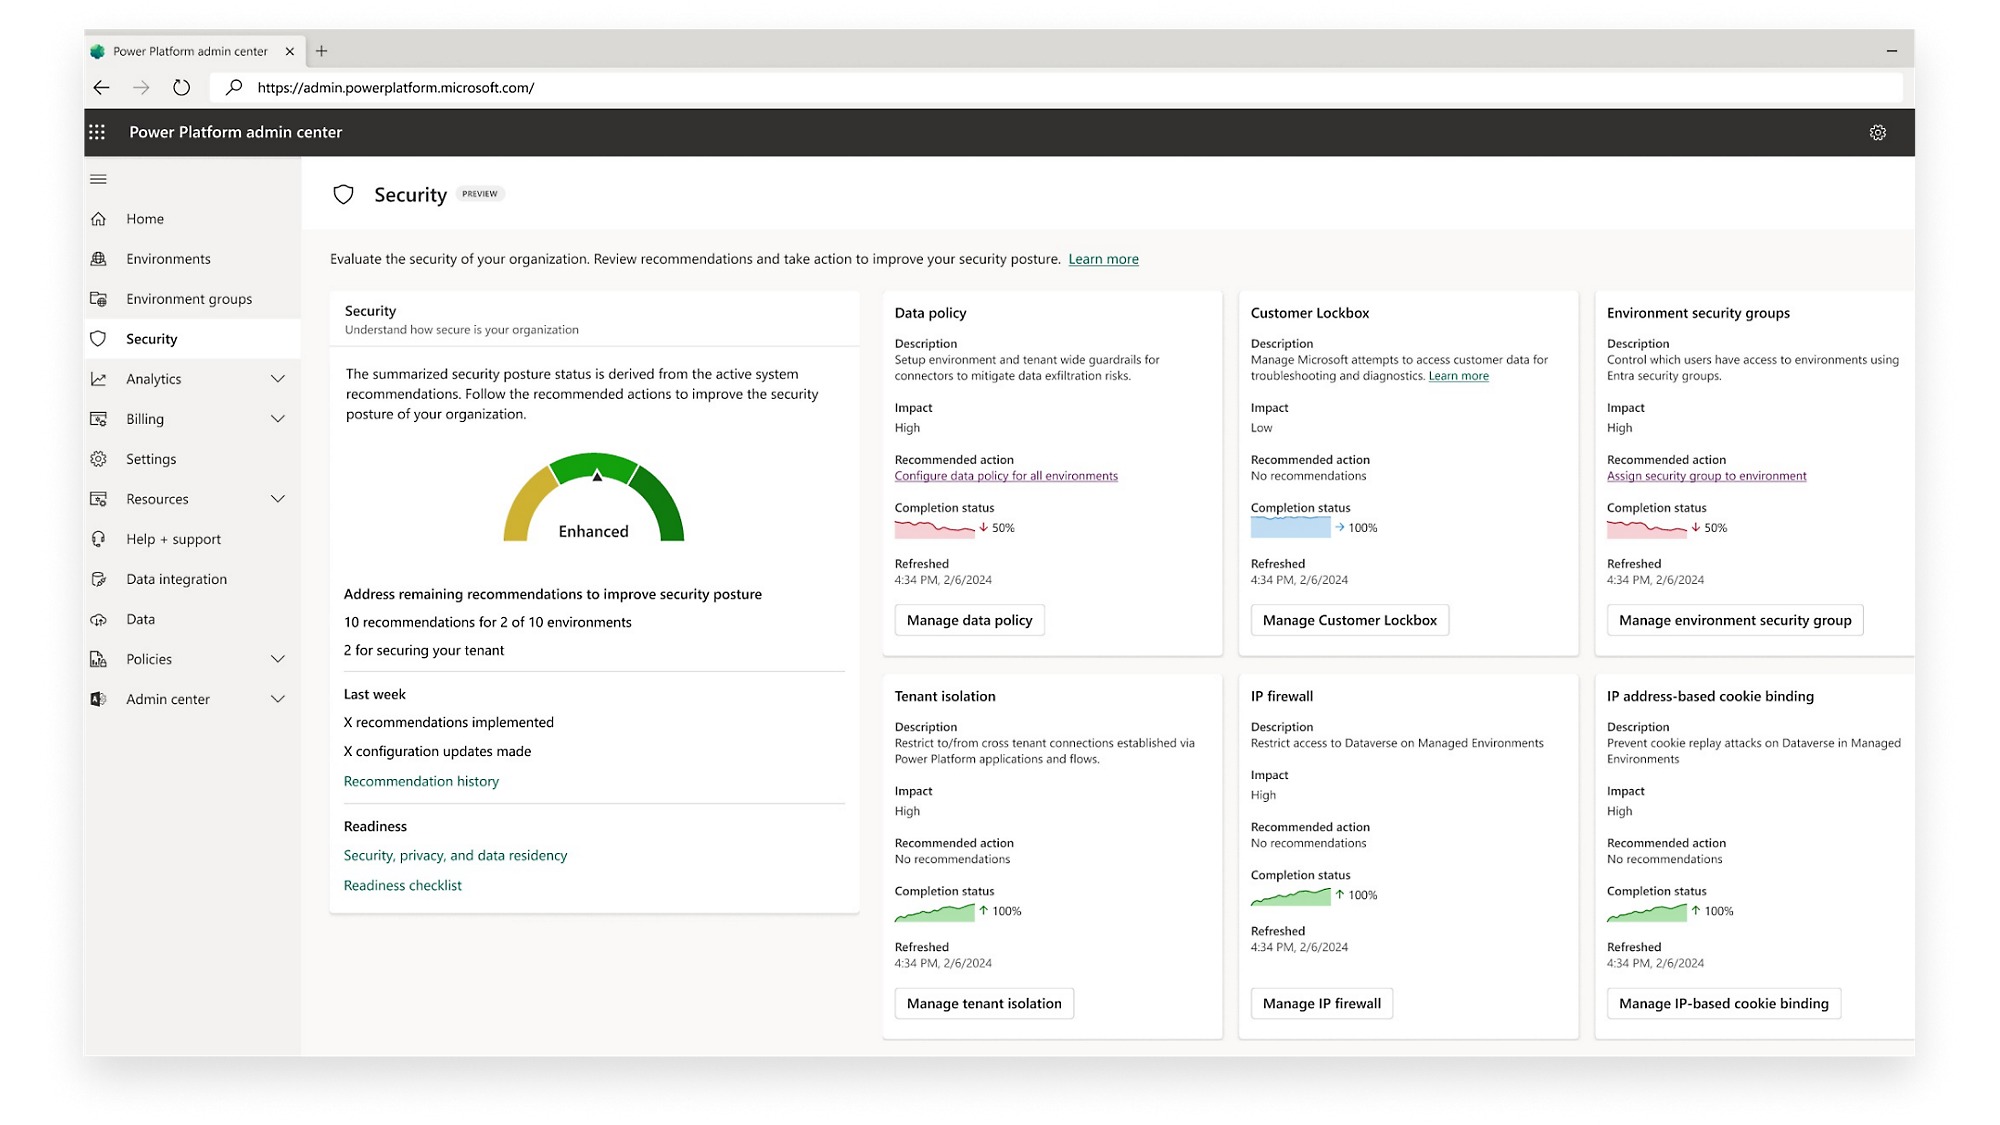 Power Platform admin center, Security Admin center, X recommendations, X configuration updates, Recommendation history, Readiness, Recommended, Security, privacy, and data residency,